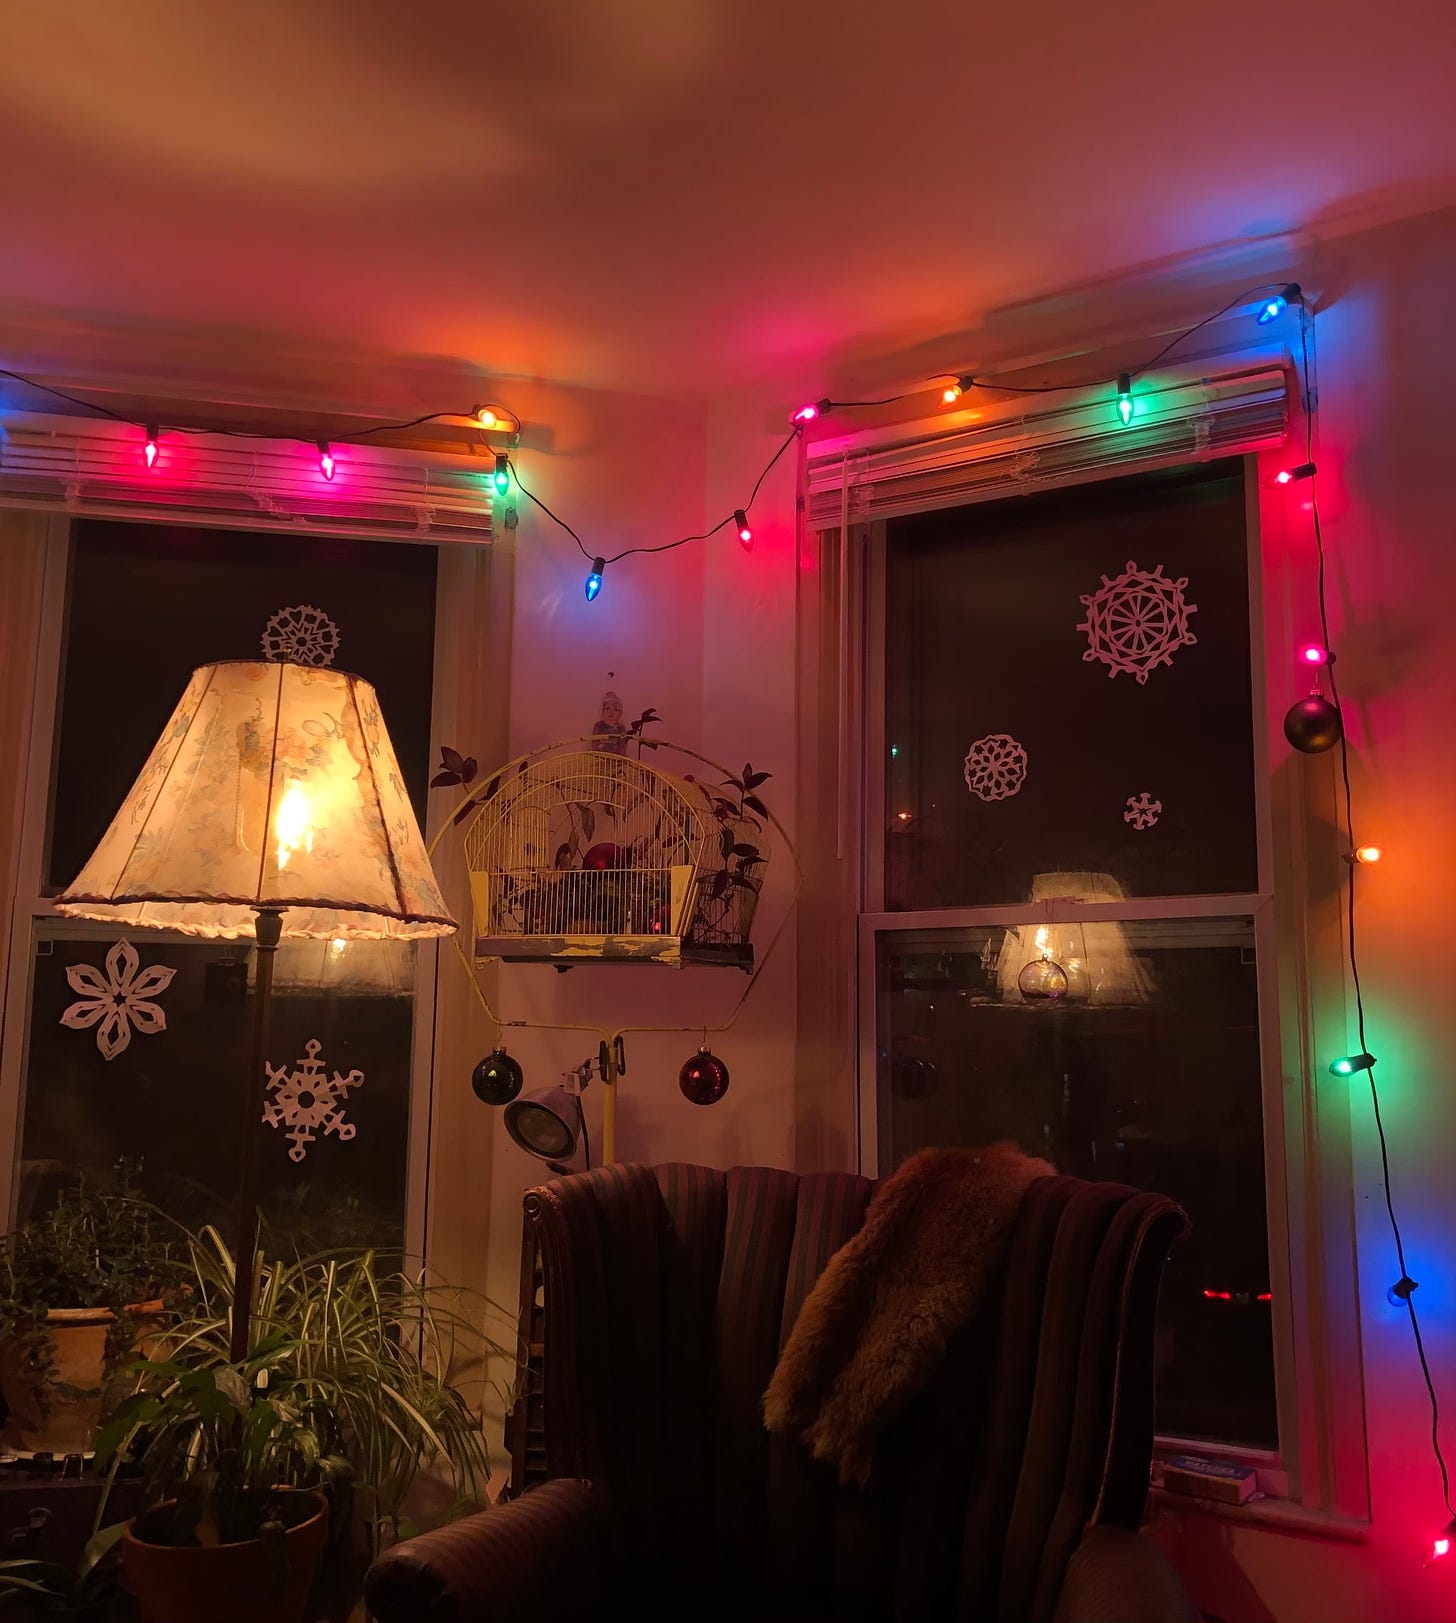 Two windows with a string of colored lights hung around them